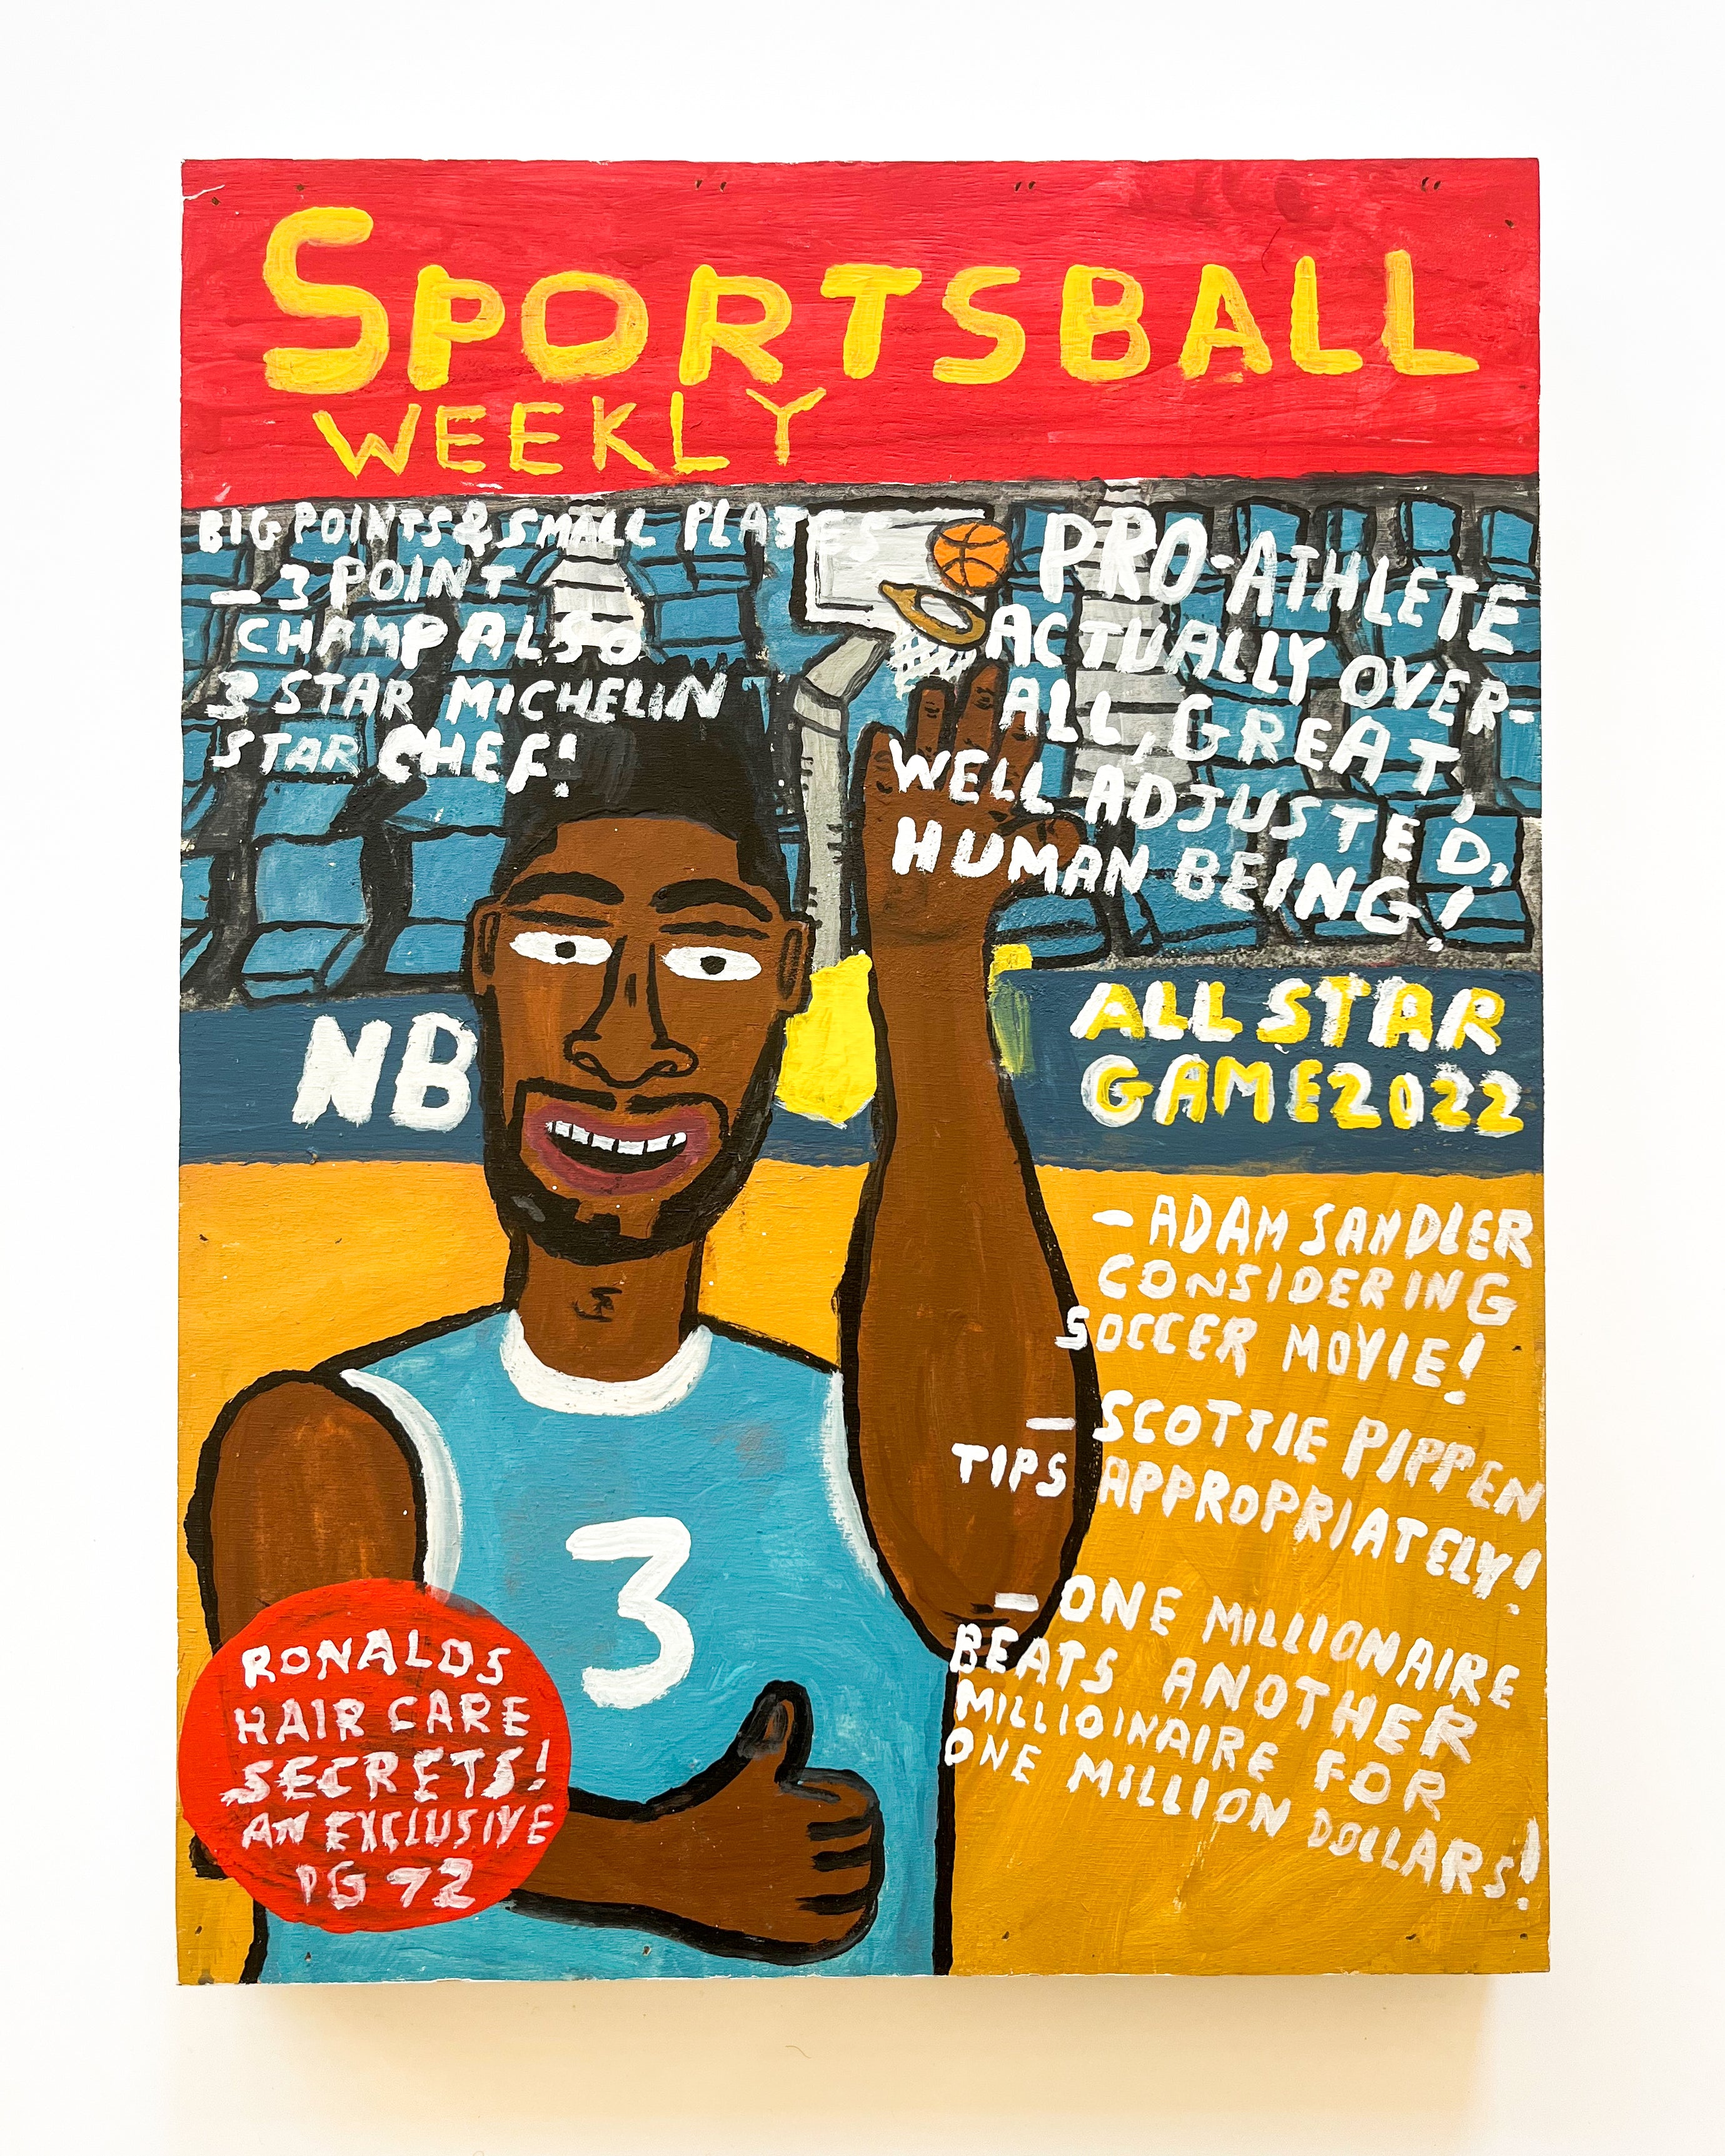 "Sportsball: All Star Game" by Dont Fret